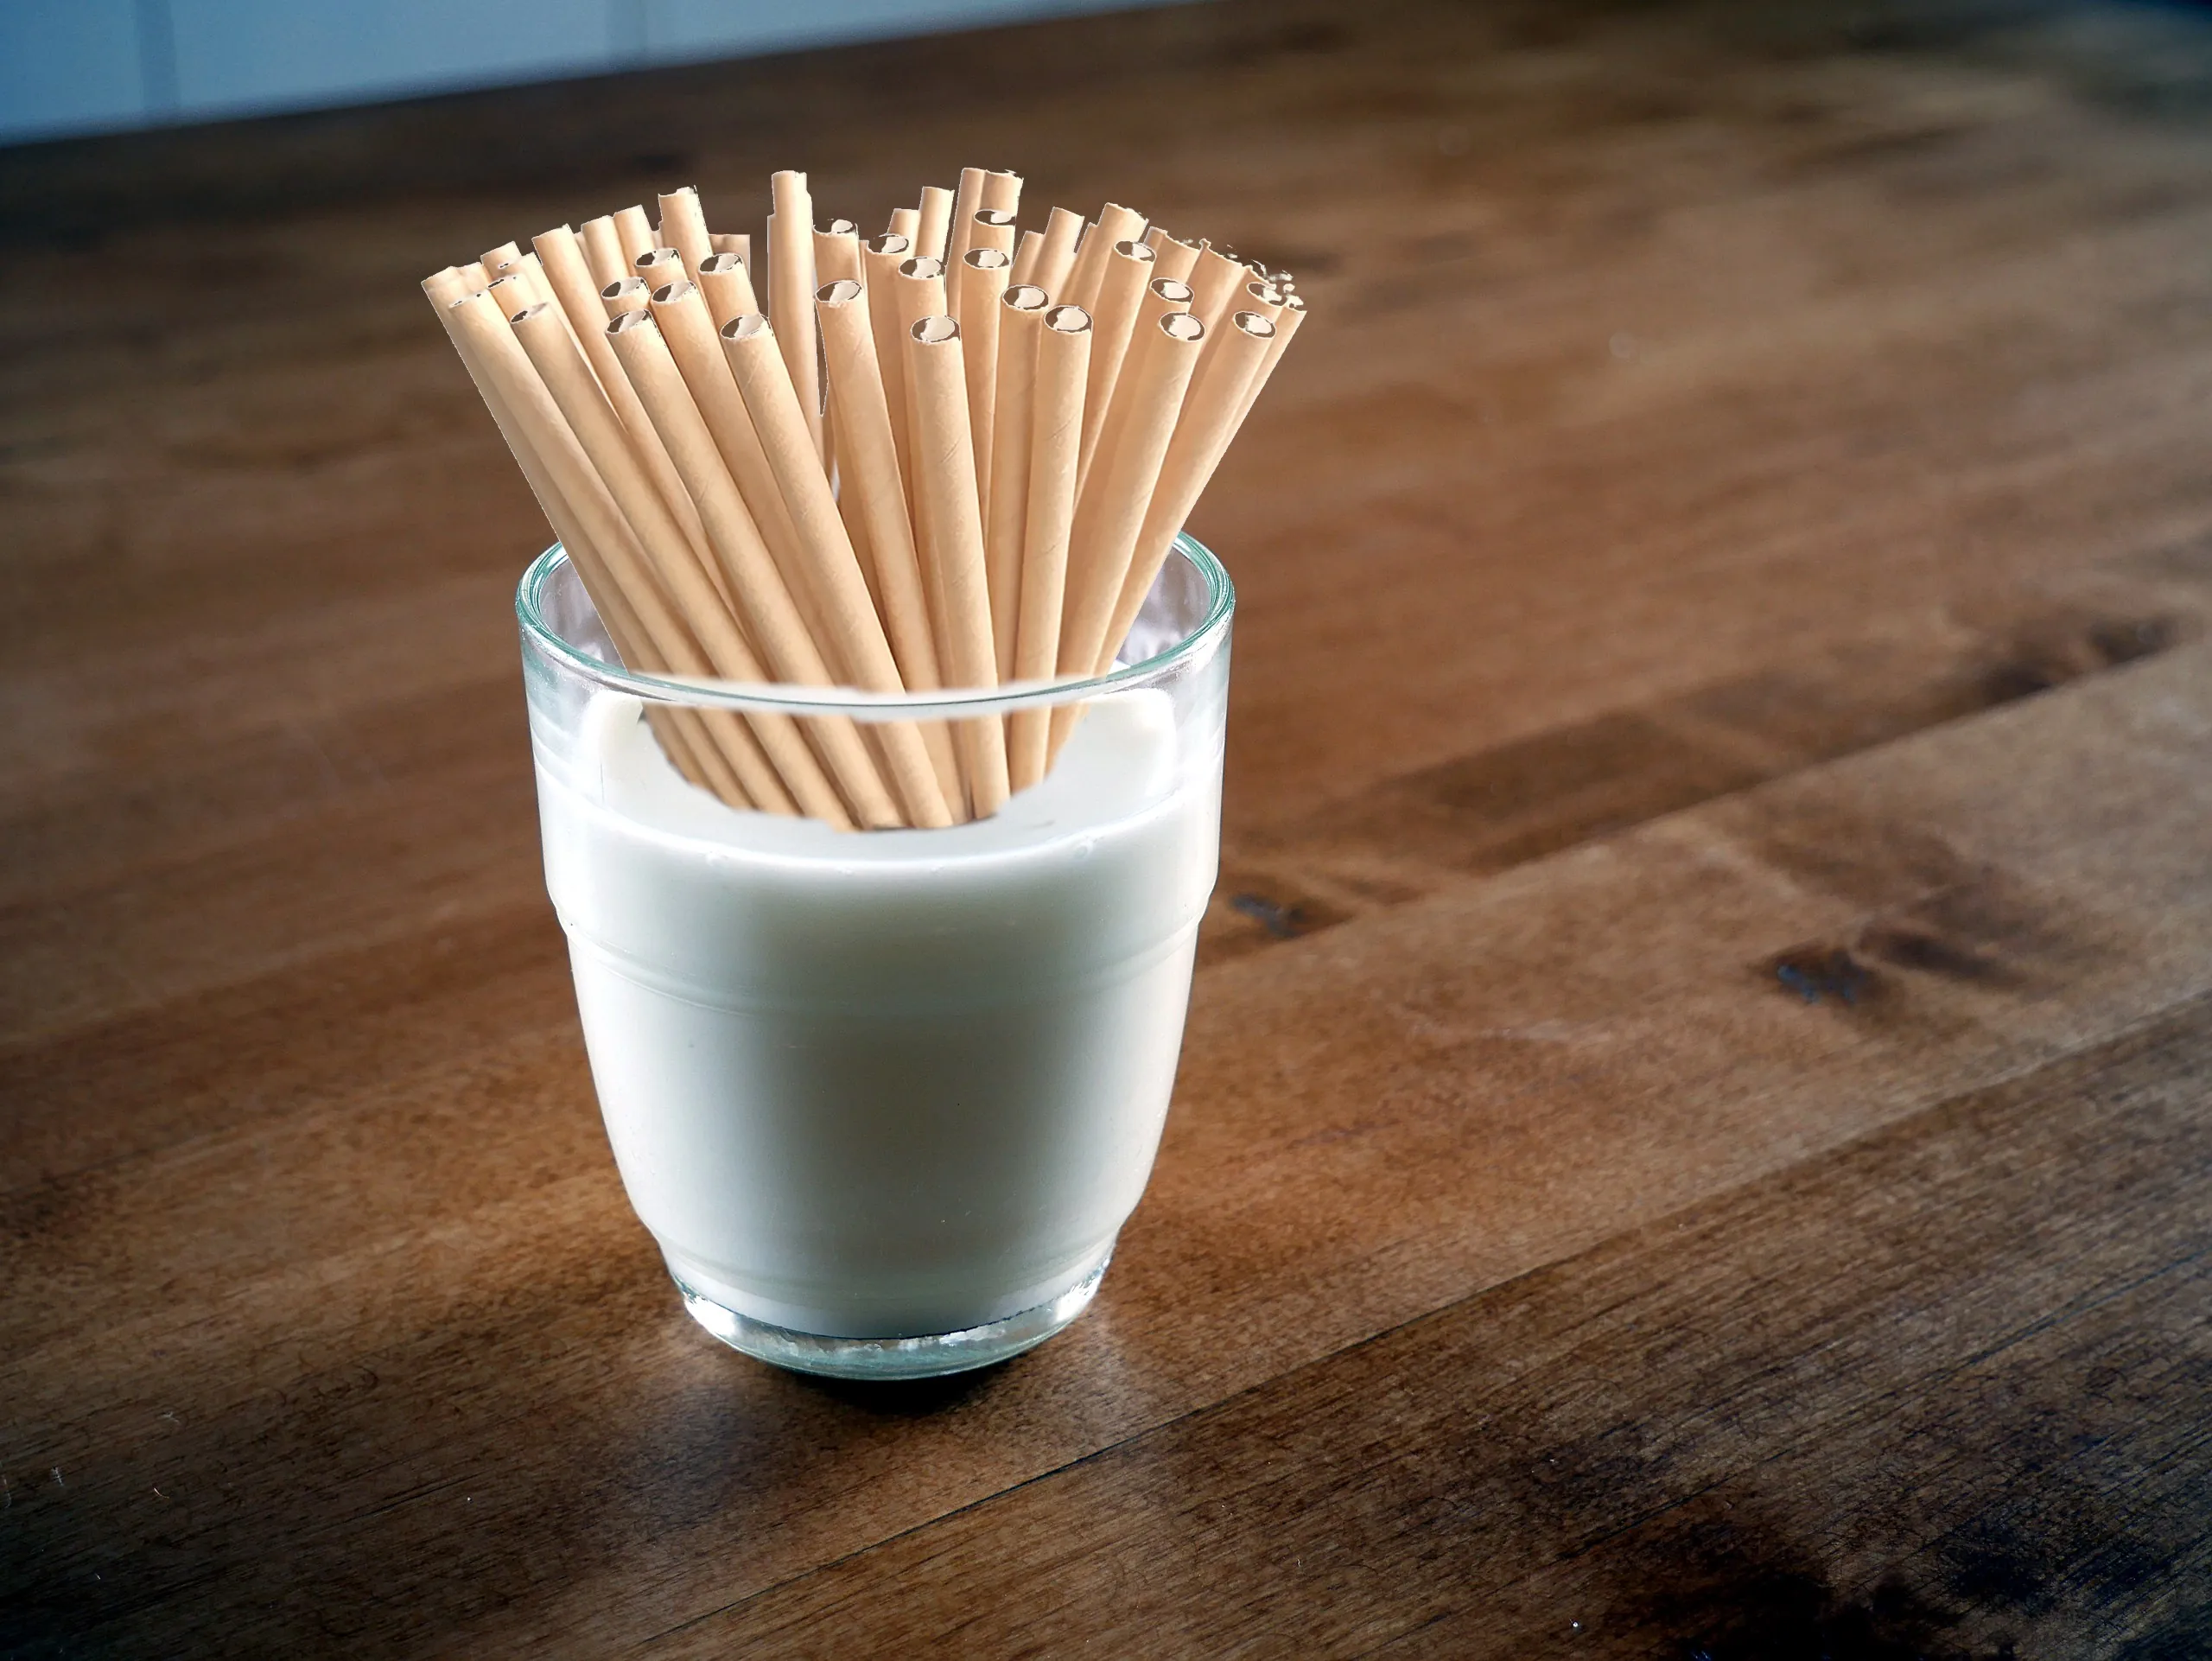 A whole bundle of paper straws in a glass of milk